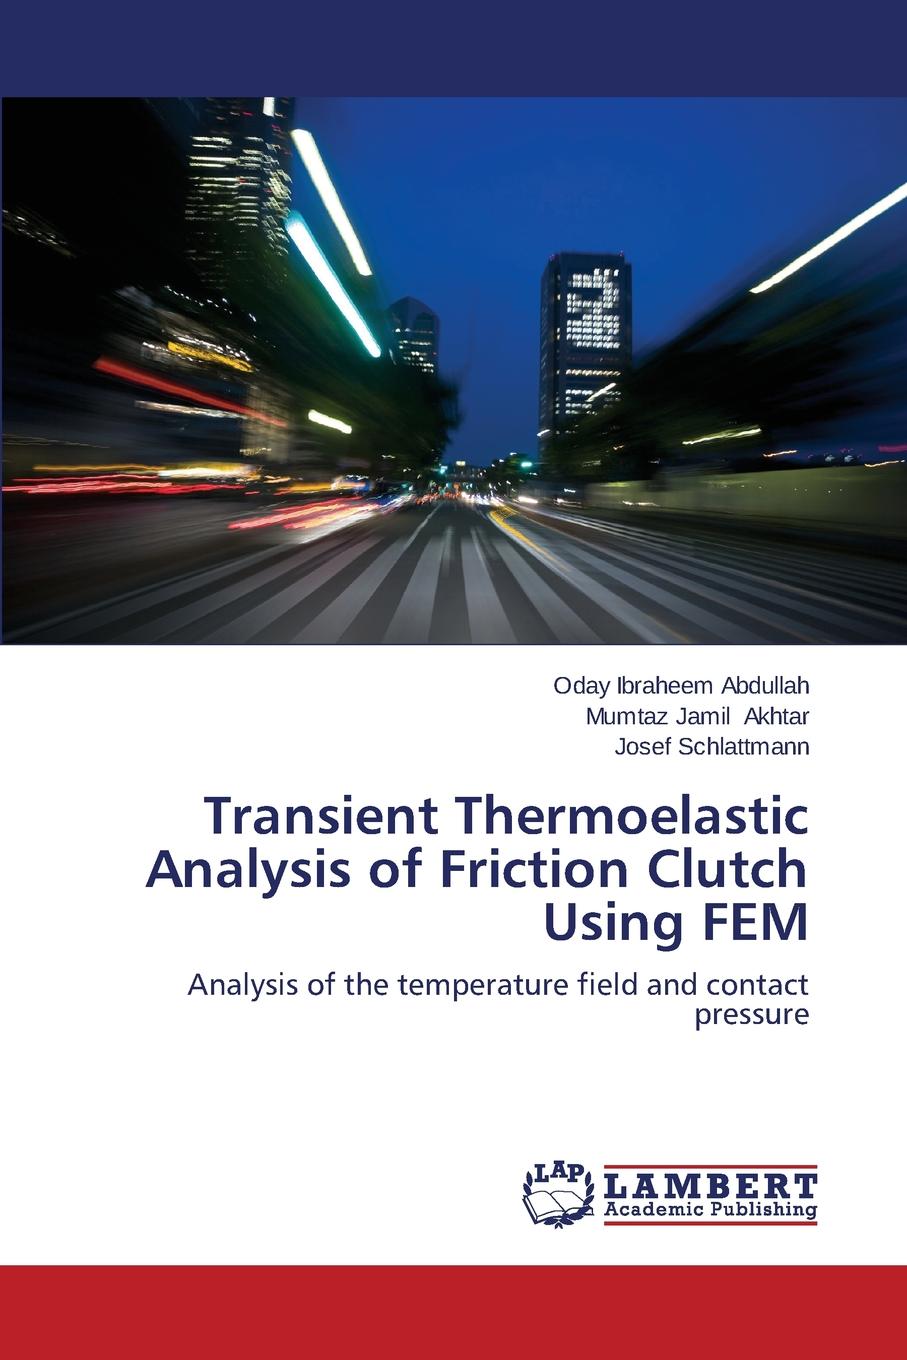 Transient Thermoelastic Analysis of Friction Clutch Using Fem